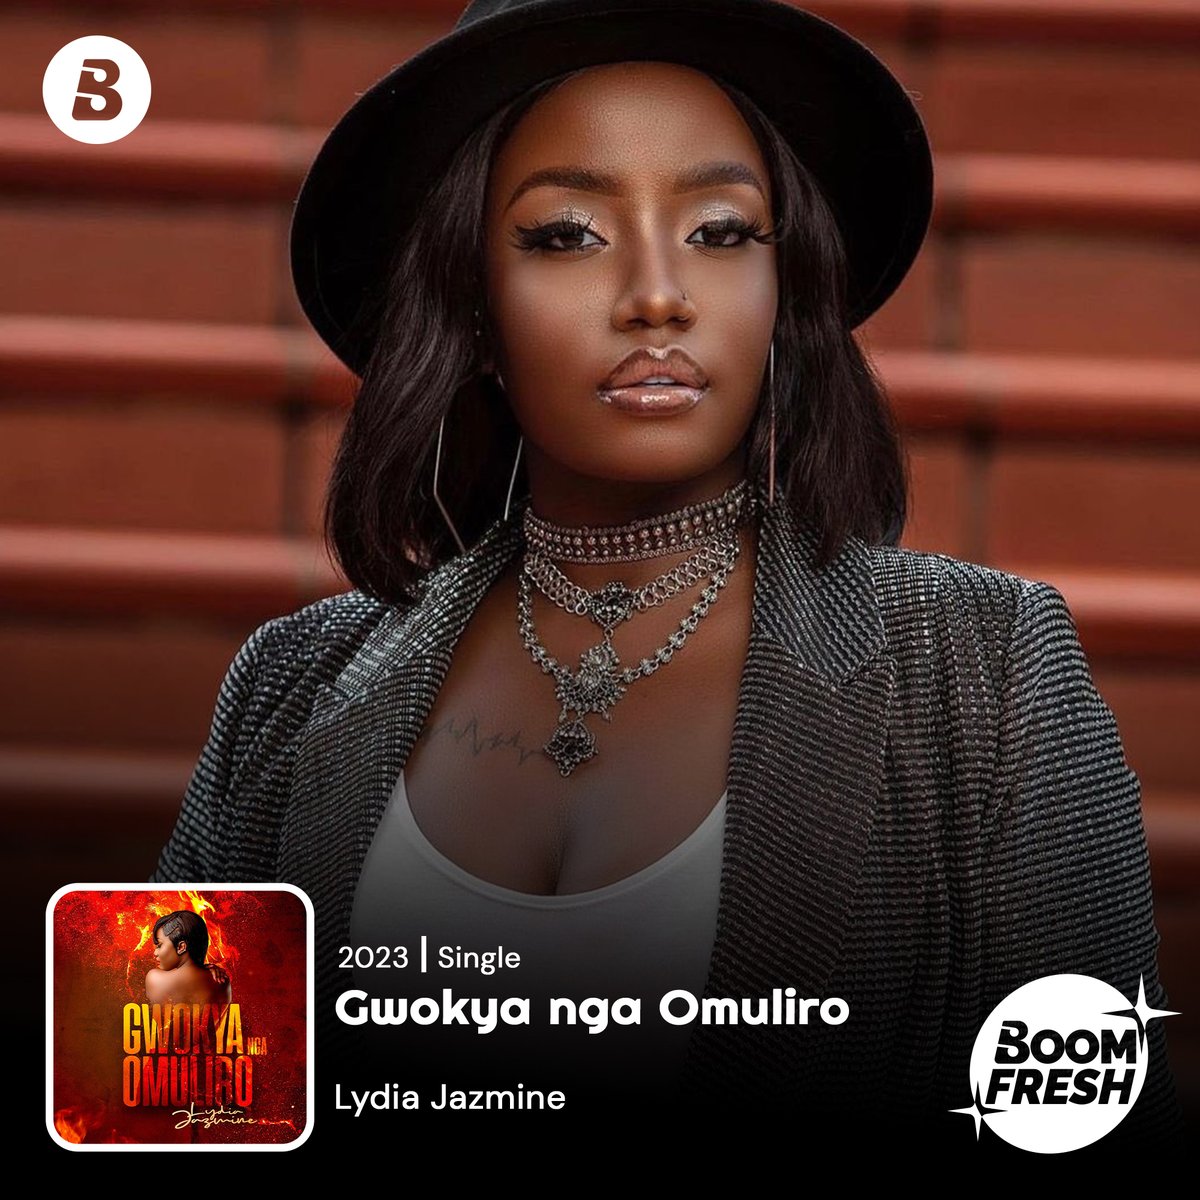 🚨BOOM FRESH🚨 @LydiahJazmine is back with some fresh vibes in a new hit dubbed #gwokyangomuliro Check it out on #boomplay .